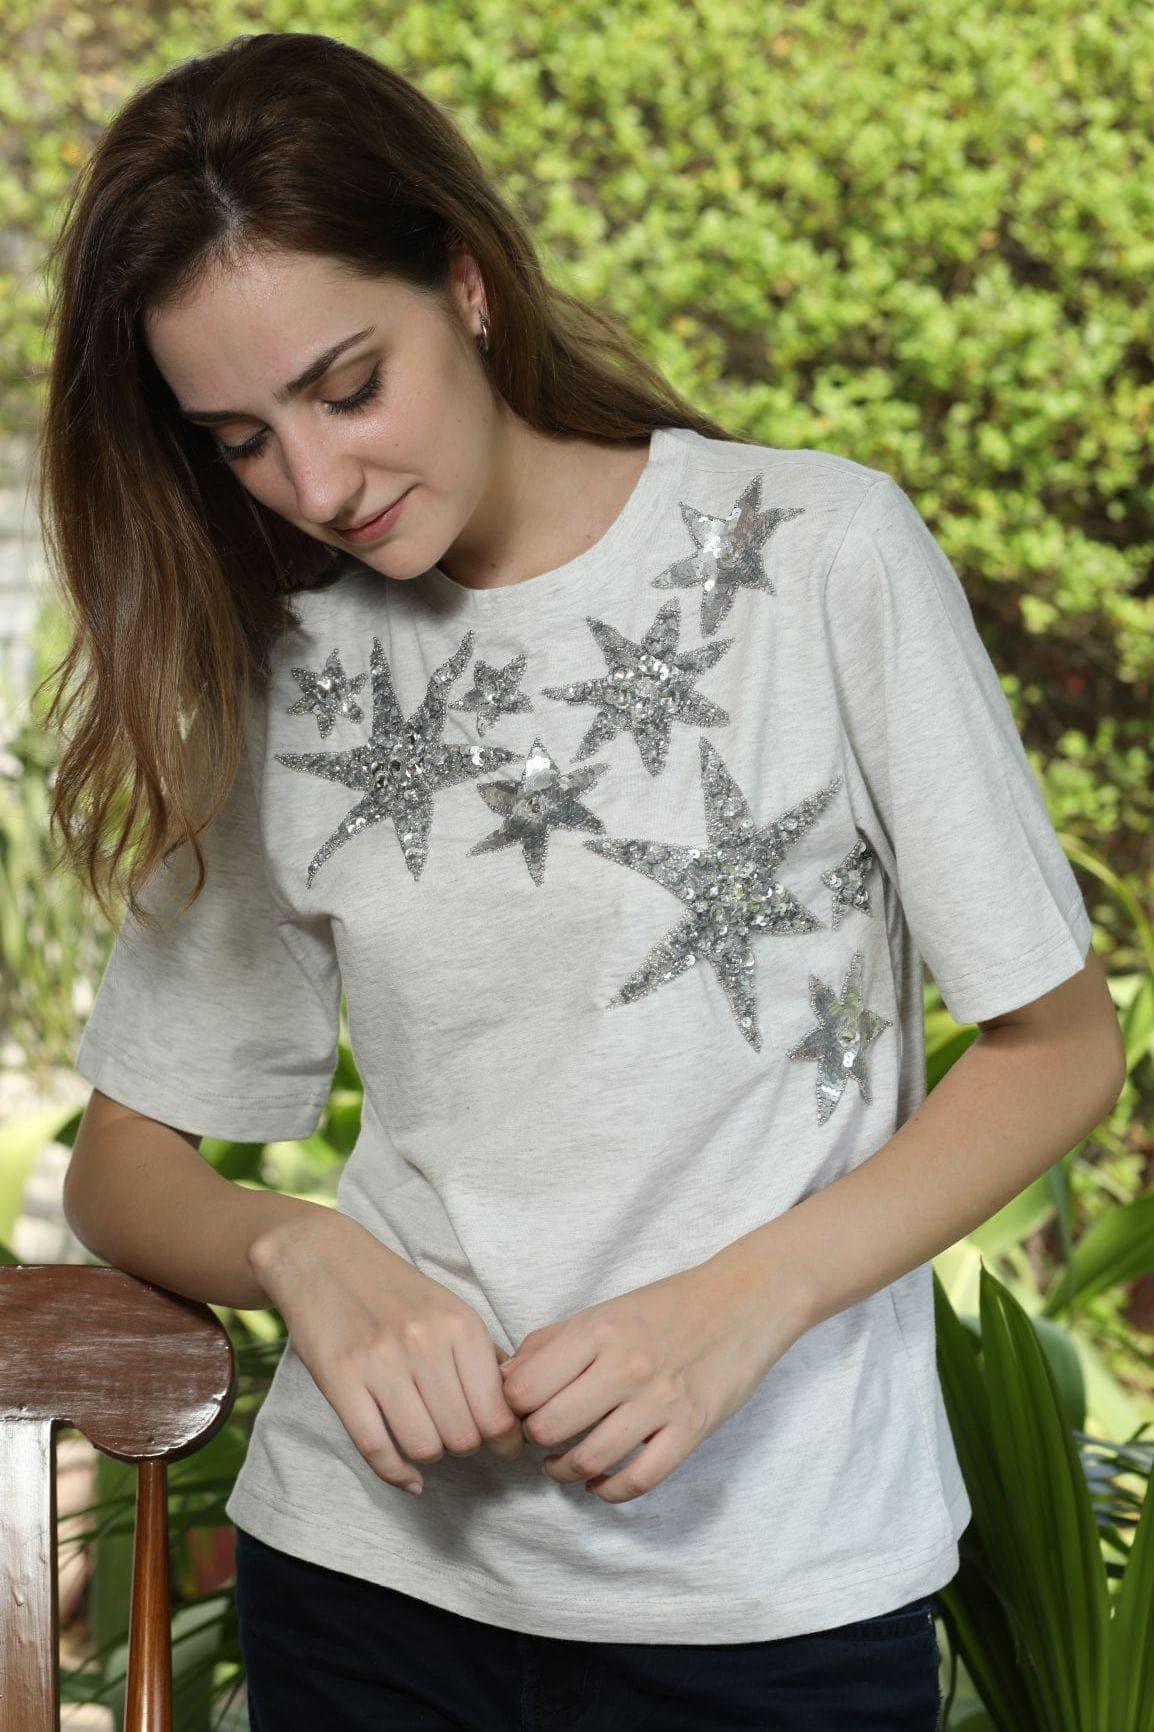 Black Star Beaded Top - Ammpoure Wellbeing